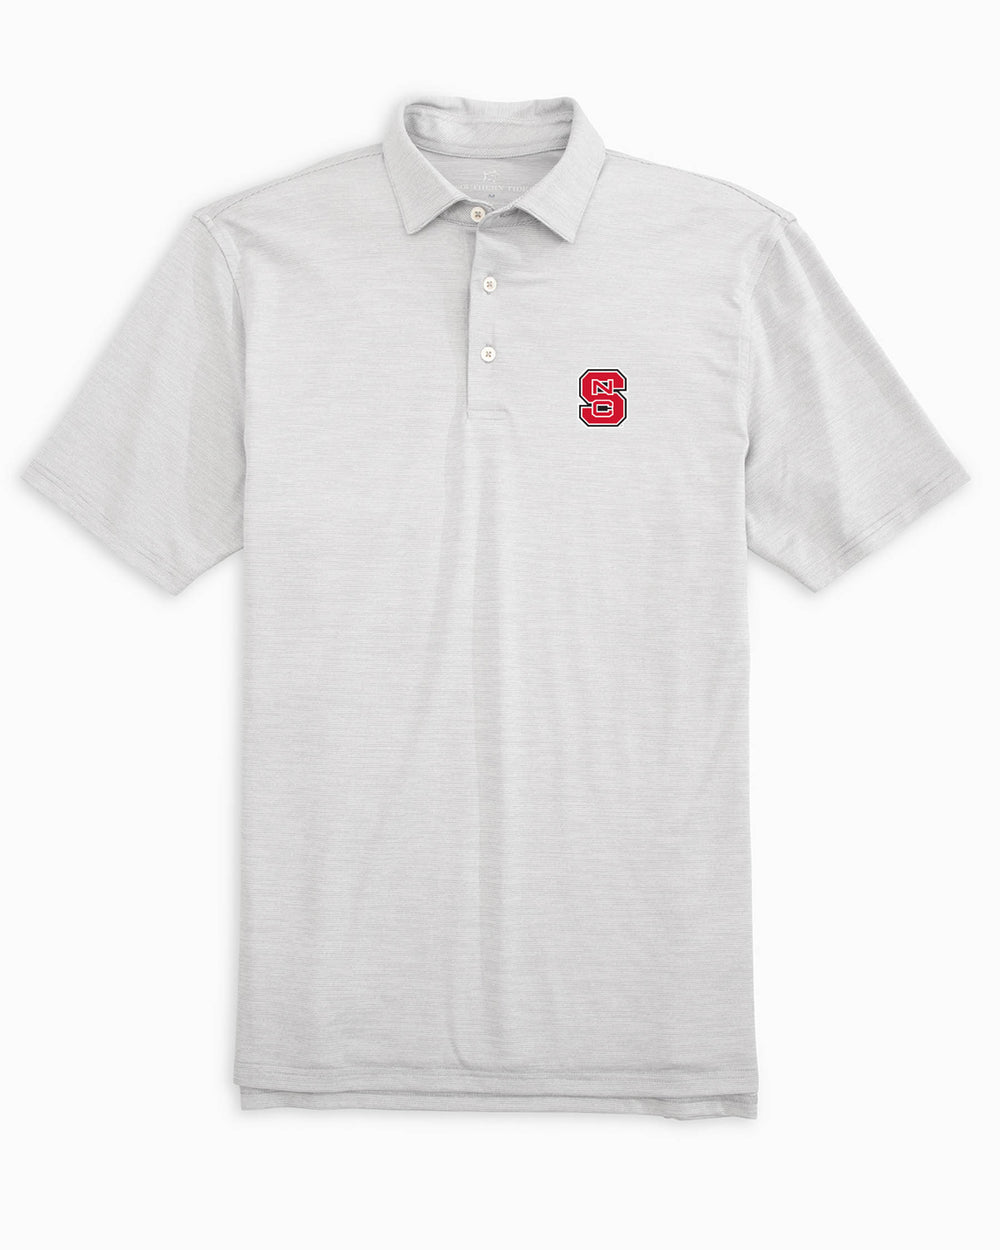 The front of the NC State Driver Spacedye Polo Shirt by Southern Tide - Slate Grey